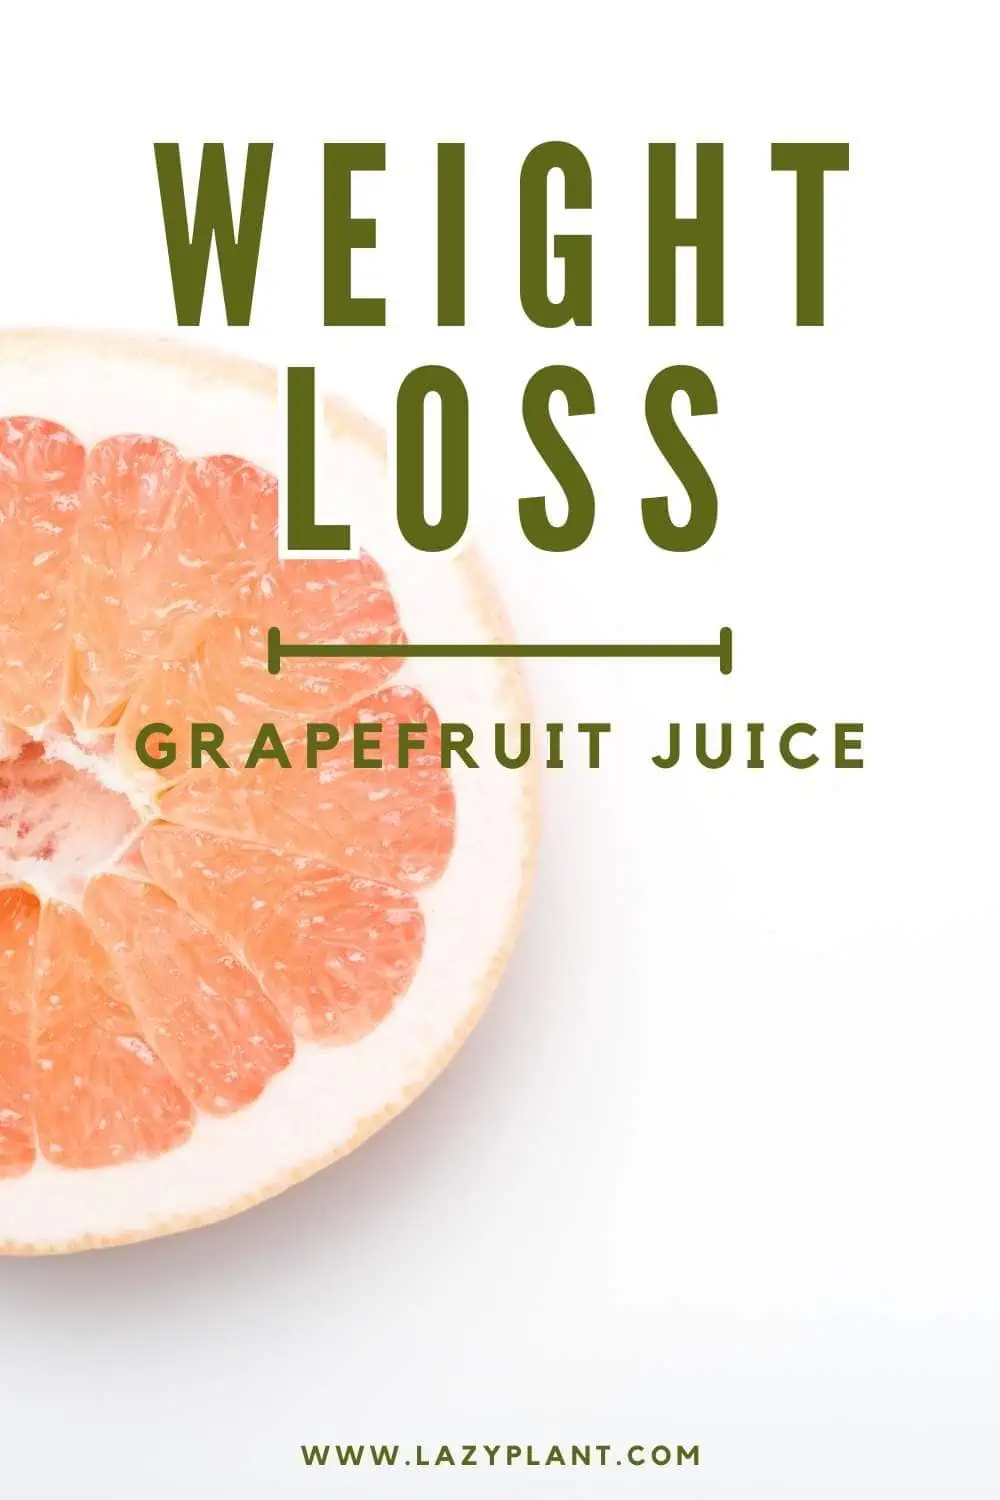 What’s the best time to drink grapefruit juice for weight loss?